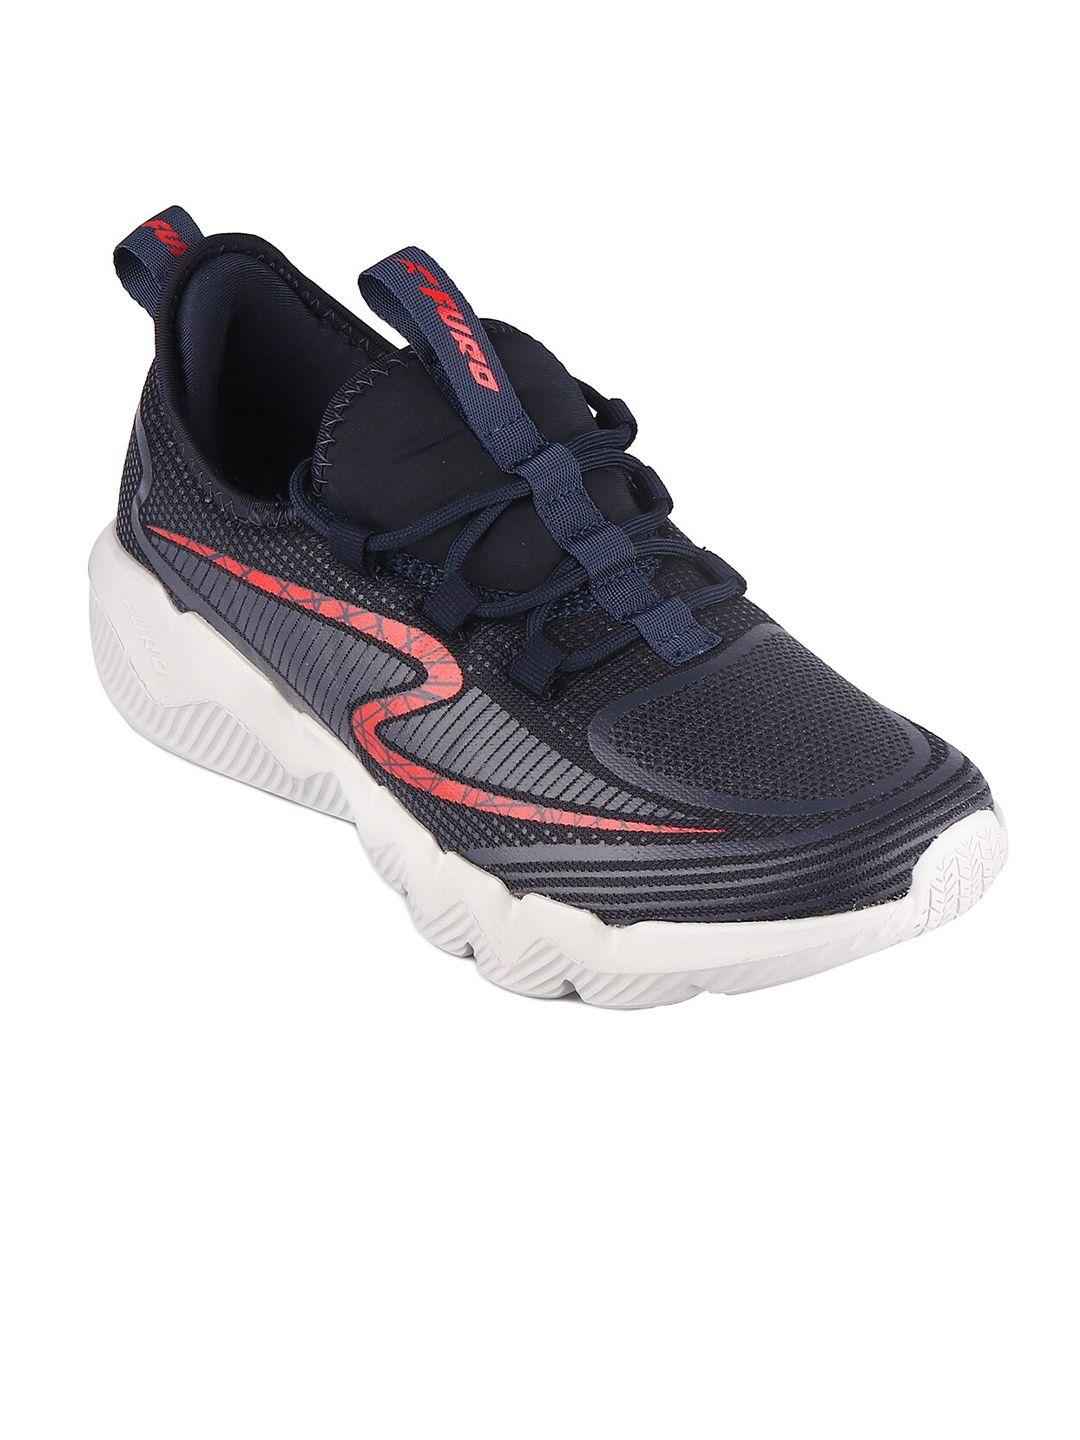 furo by red chief men mesh walking sports shoes